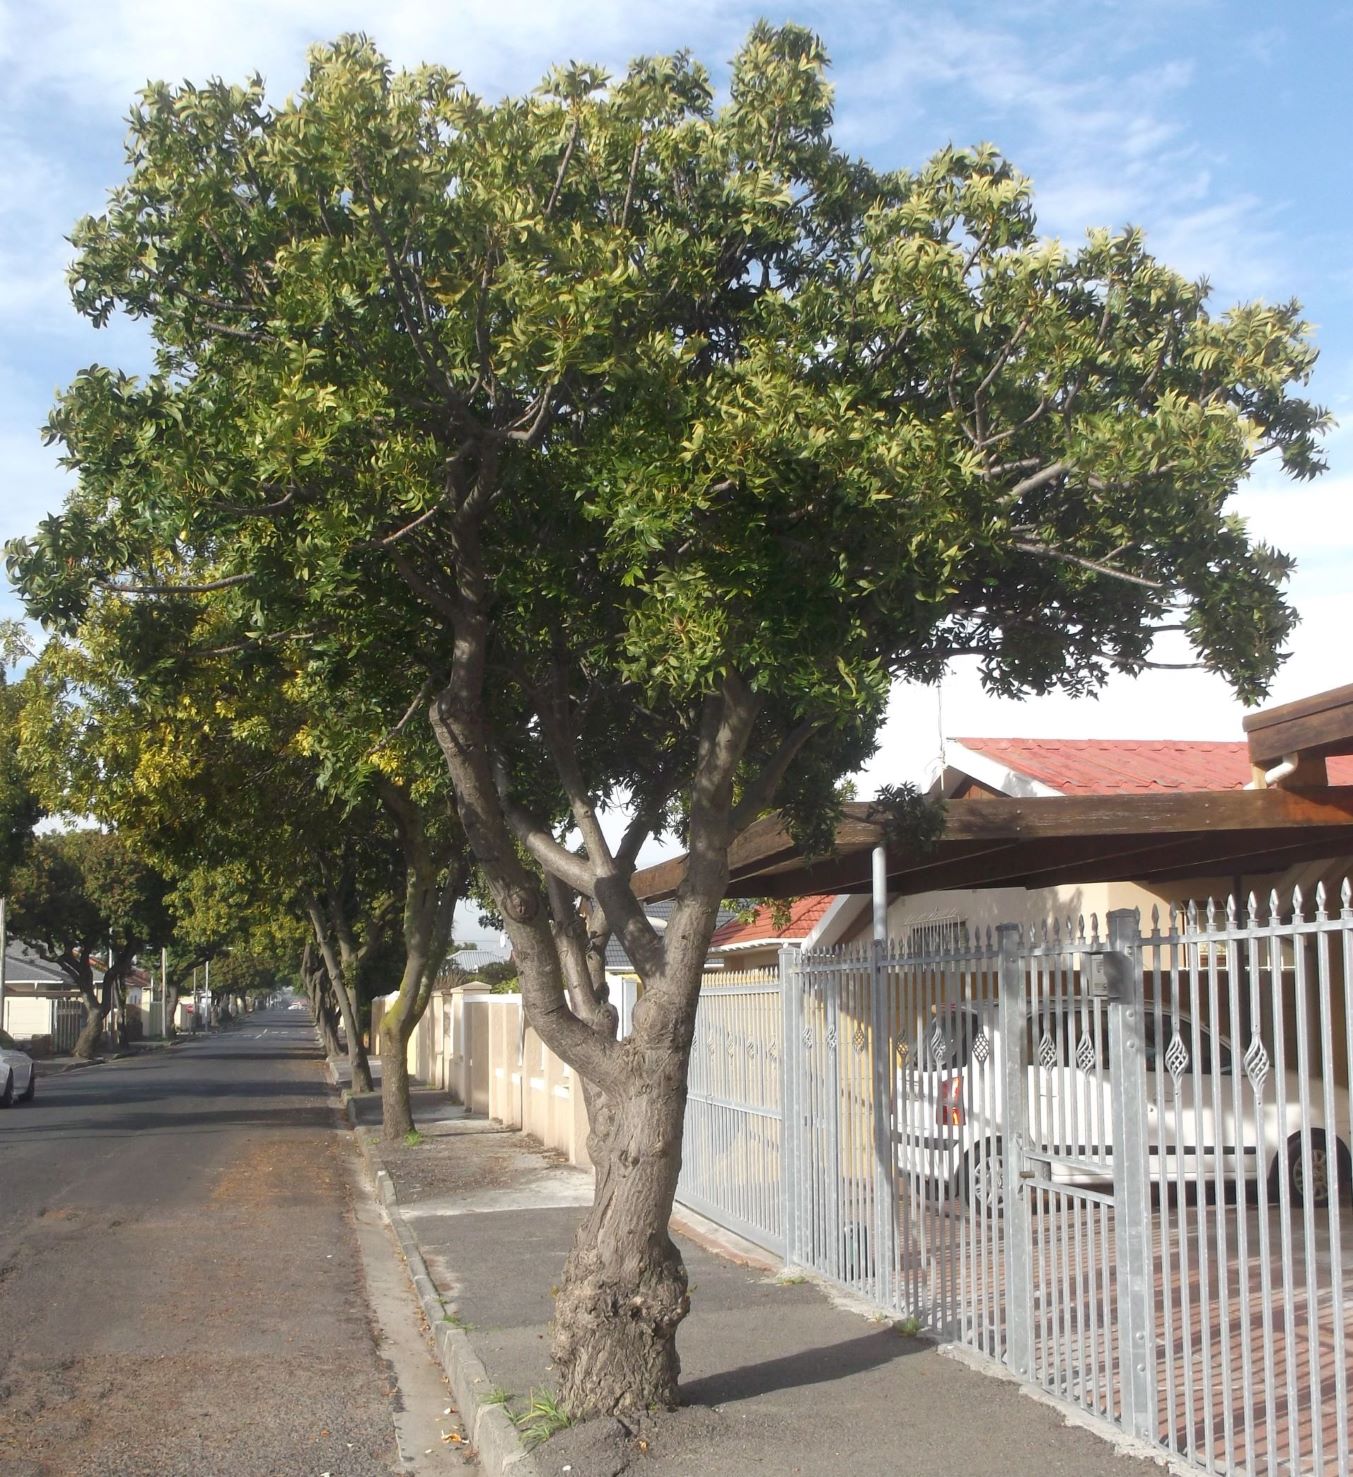 A whole street of African wild plum trees in Goodwood